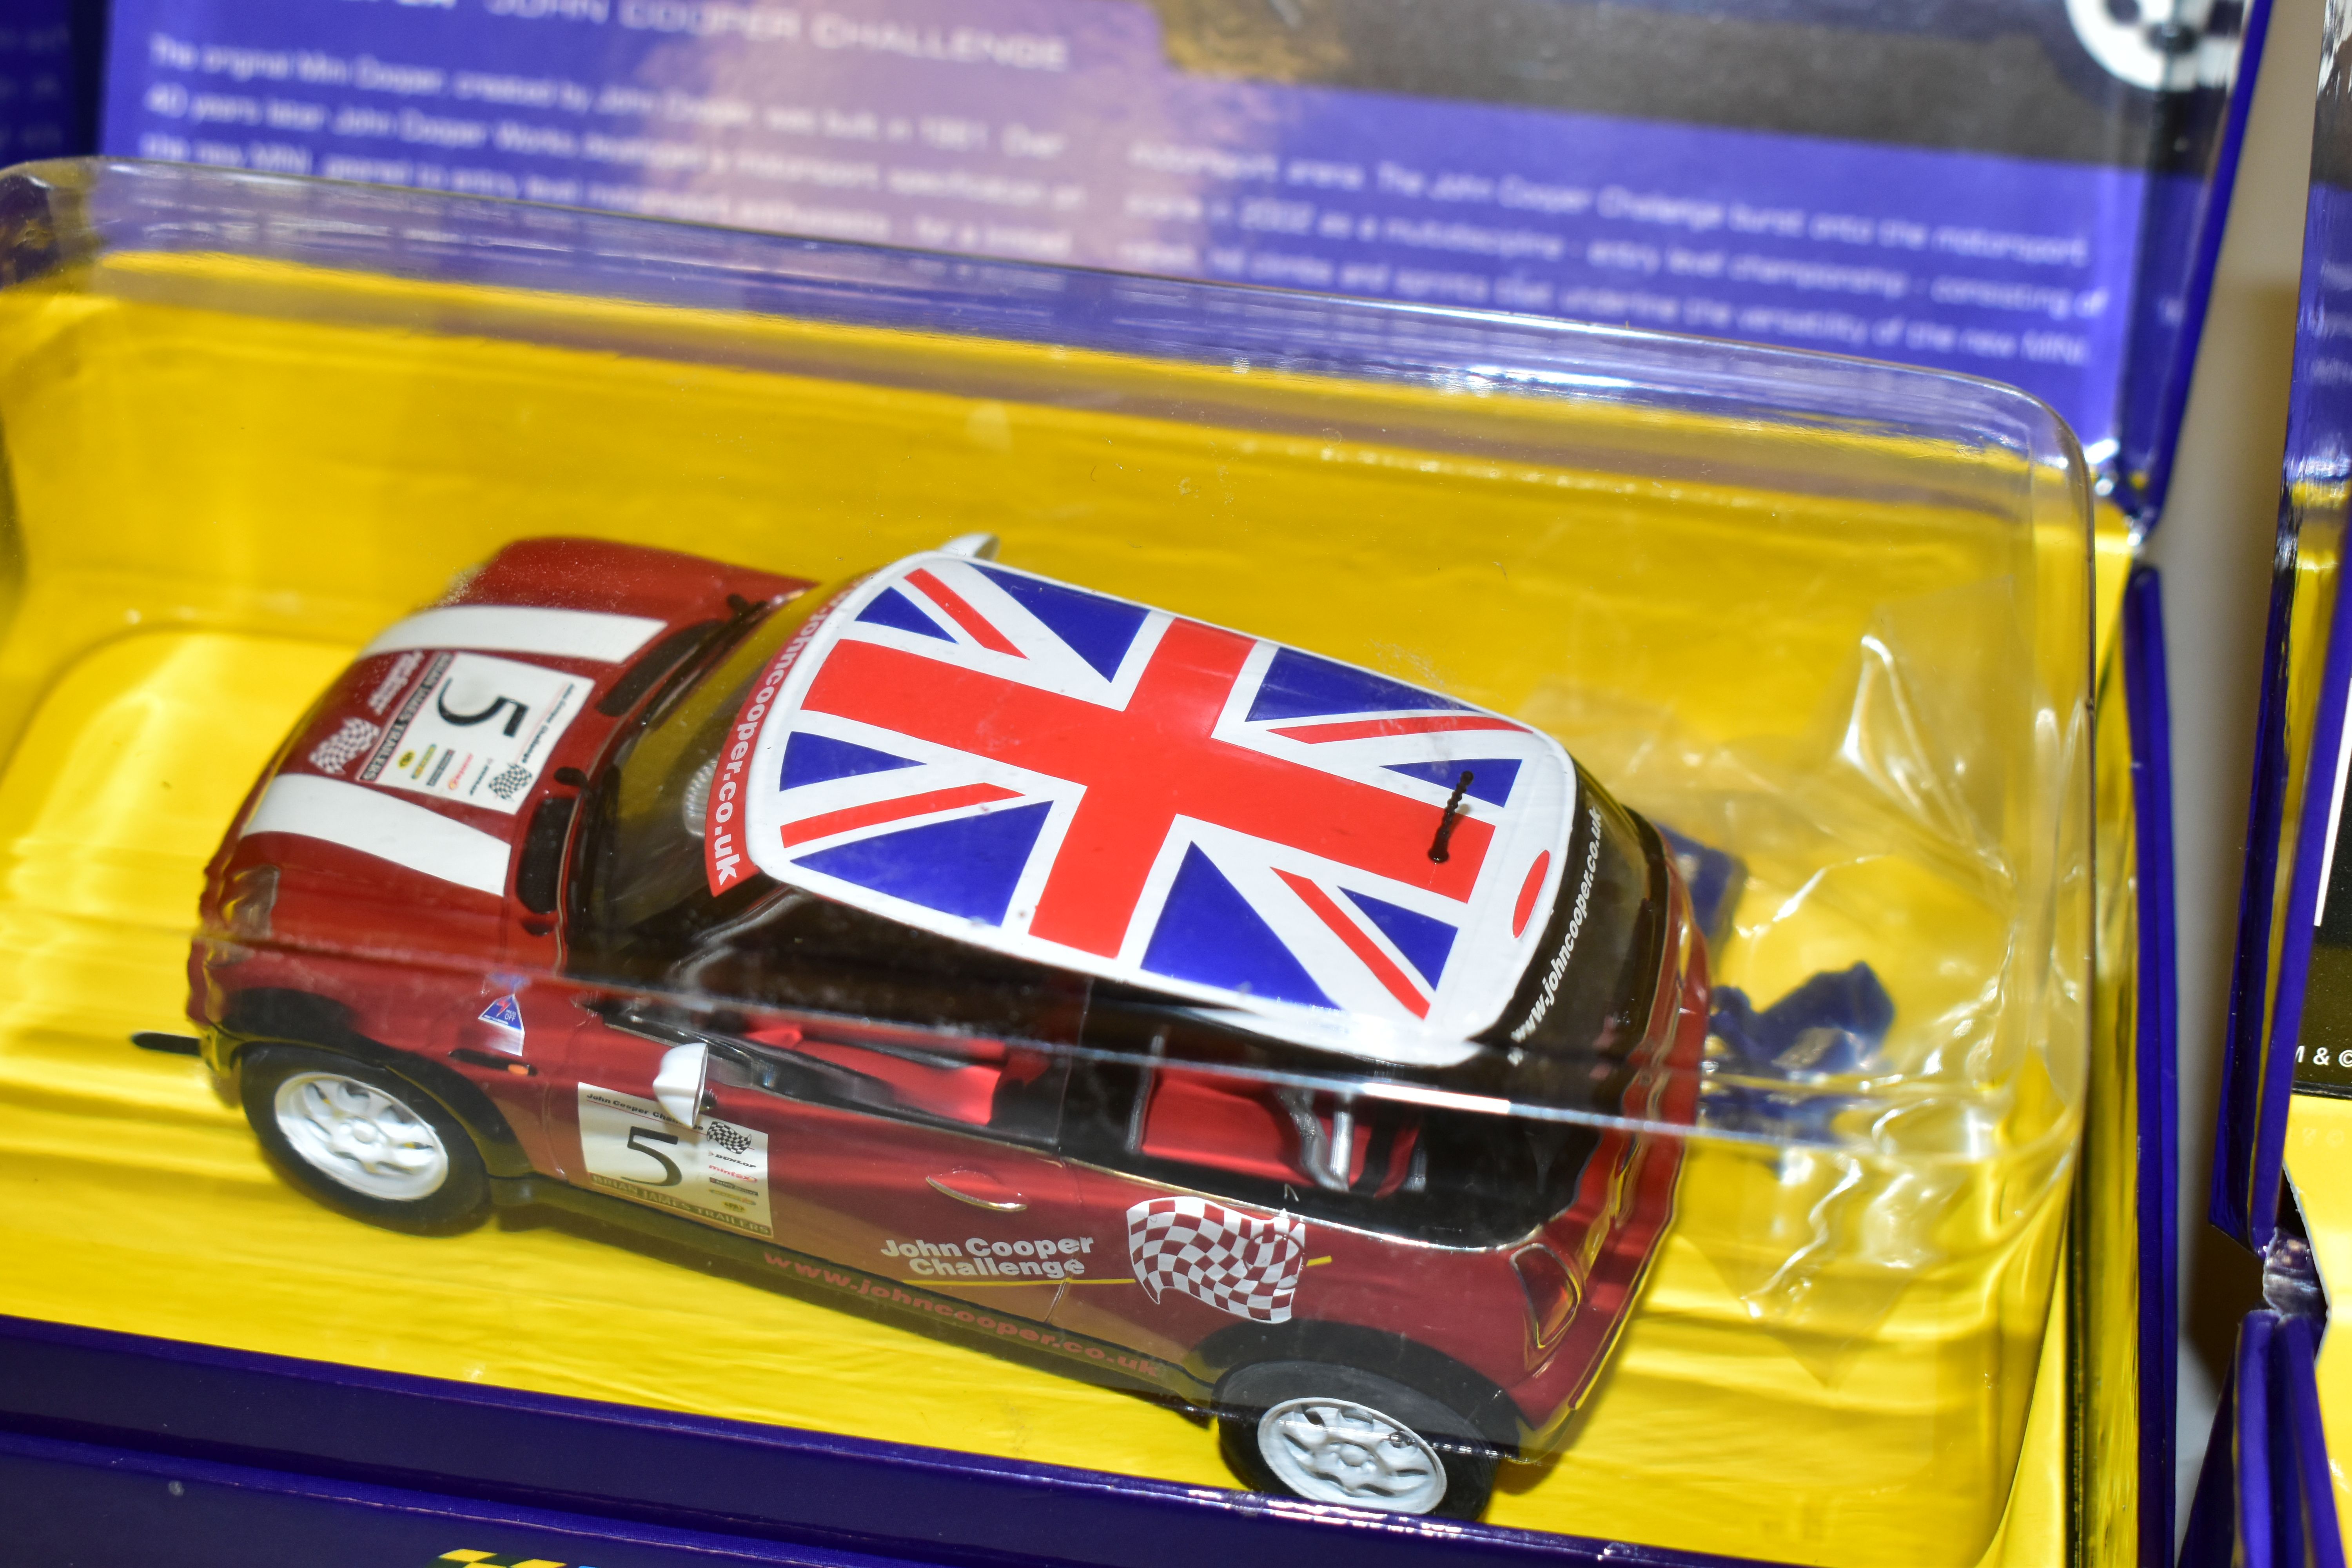 THREE BOXED SCALEXTRIC SPORT LIMITED EDITION THE ITALIAN JOB MINI COOPER S CARS, red (C2538A), white - Image 7 of 8